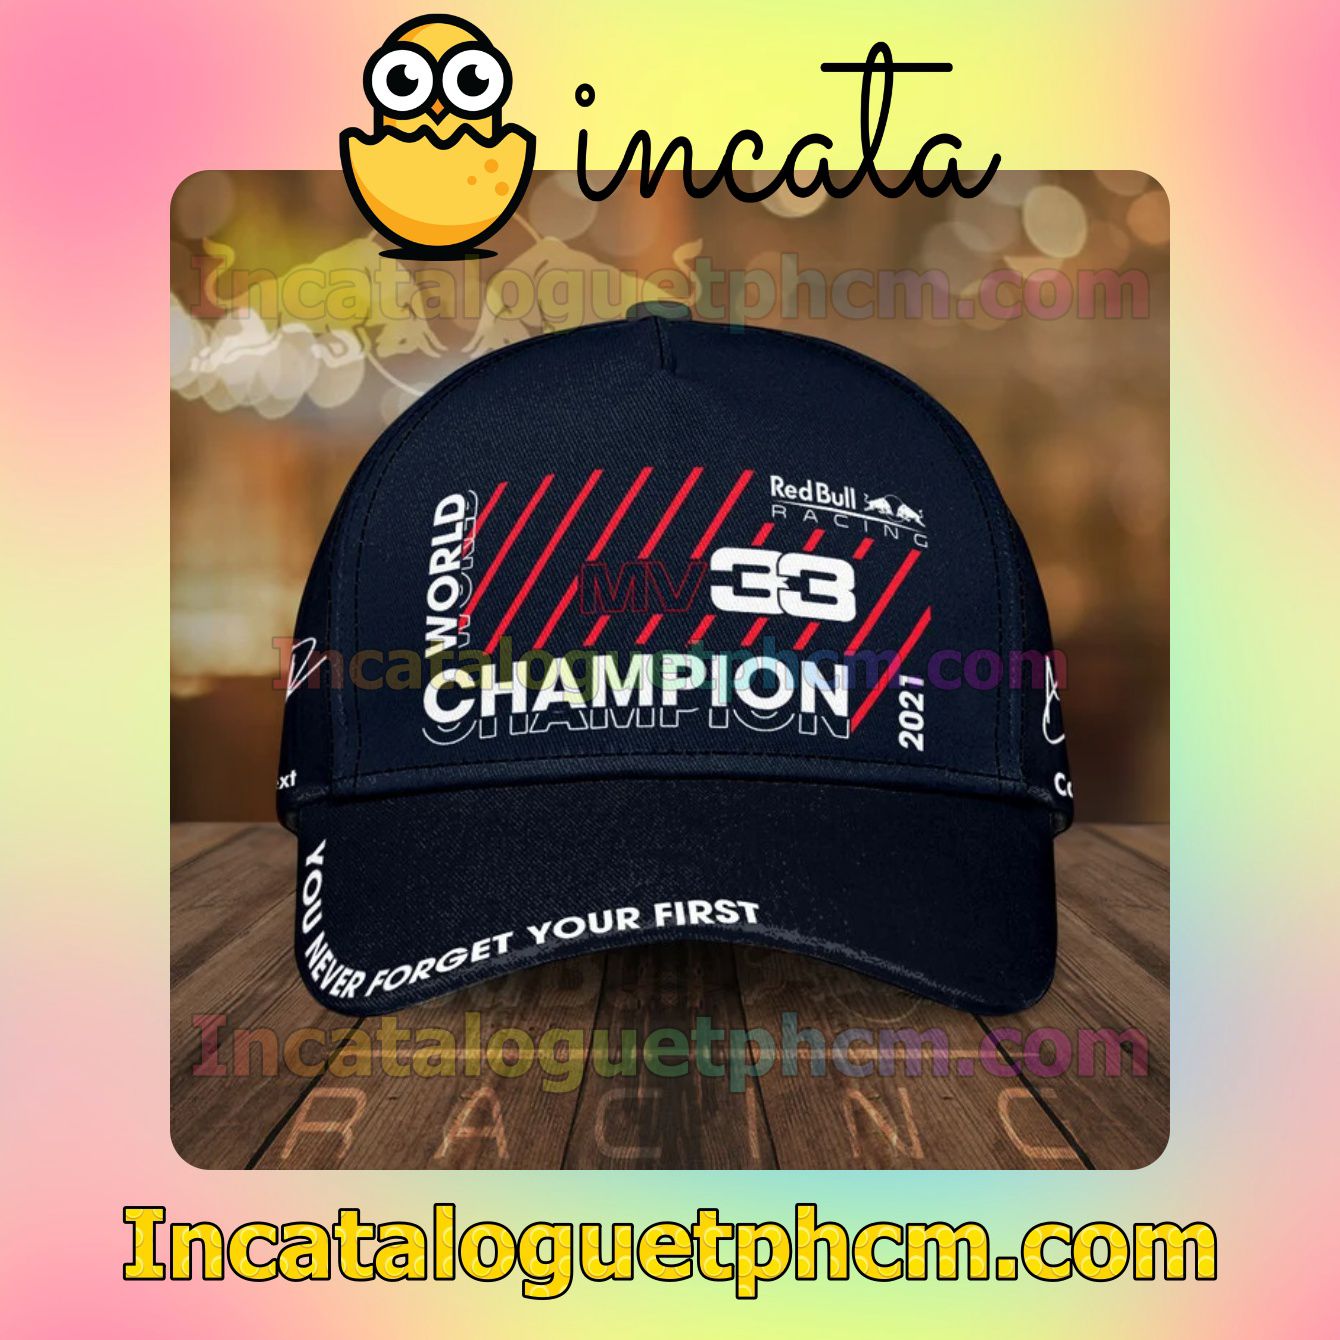 Amazon Red Bull Racing Mv 33 World Champion 2021 You Never Forget Your First Classic Hat Caps Gift For Men